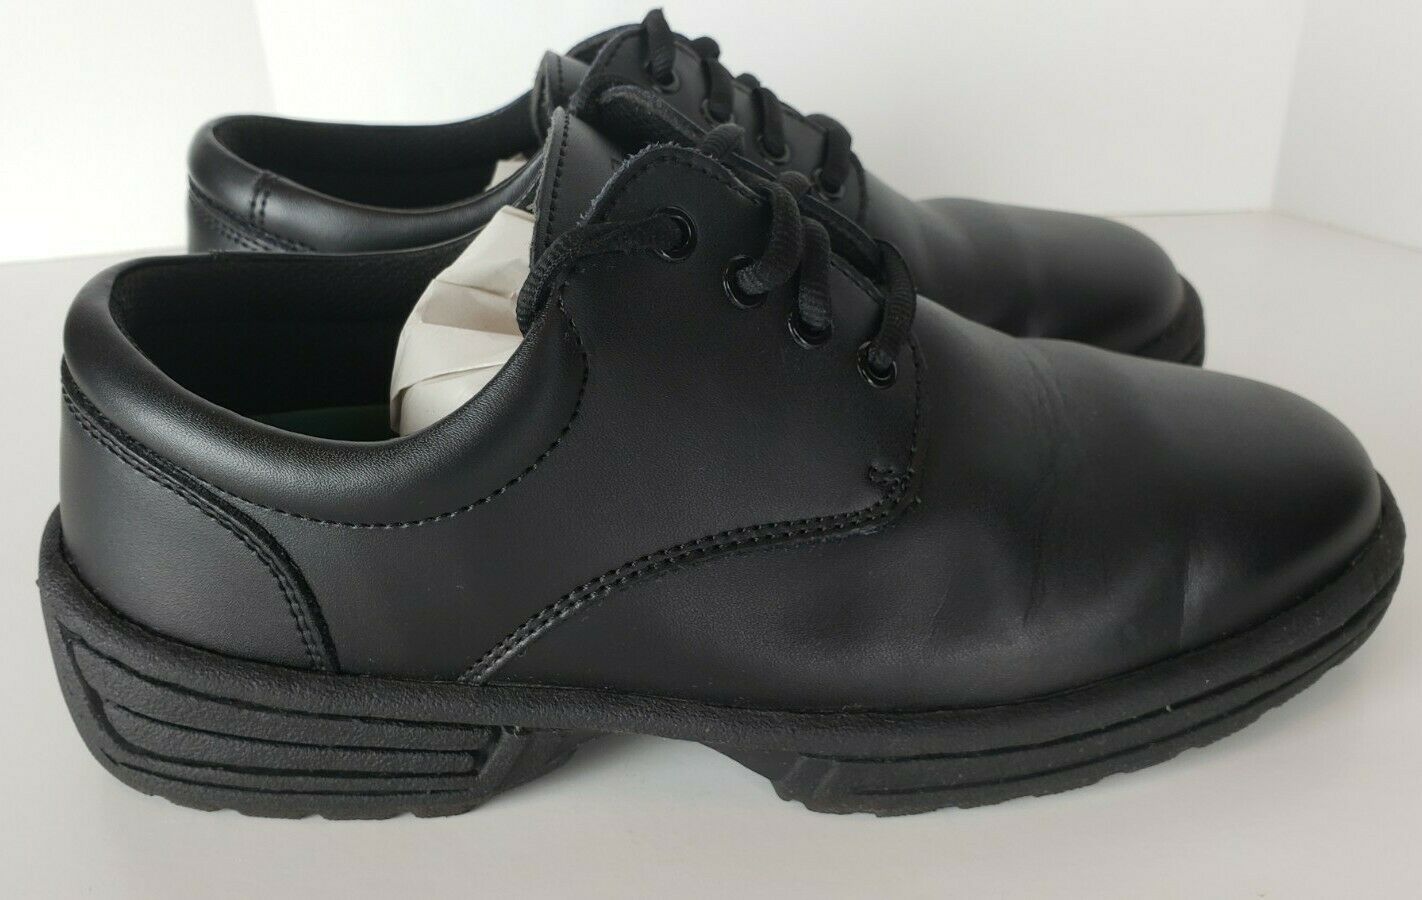 Mtx Dsi Black Leather Upper Marching Band Shoes Men "size 5.5 M" Or Women"7.5 M"